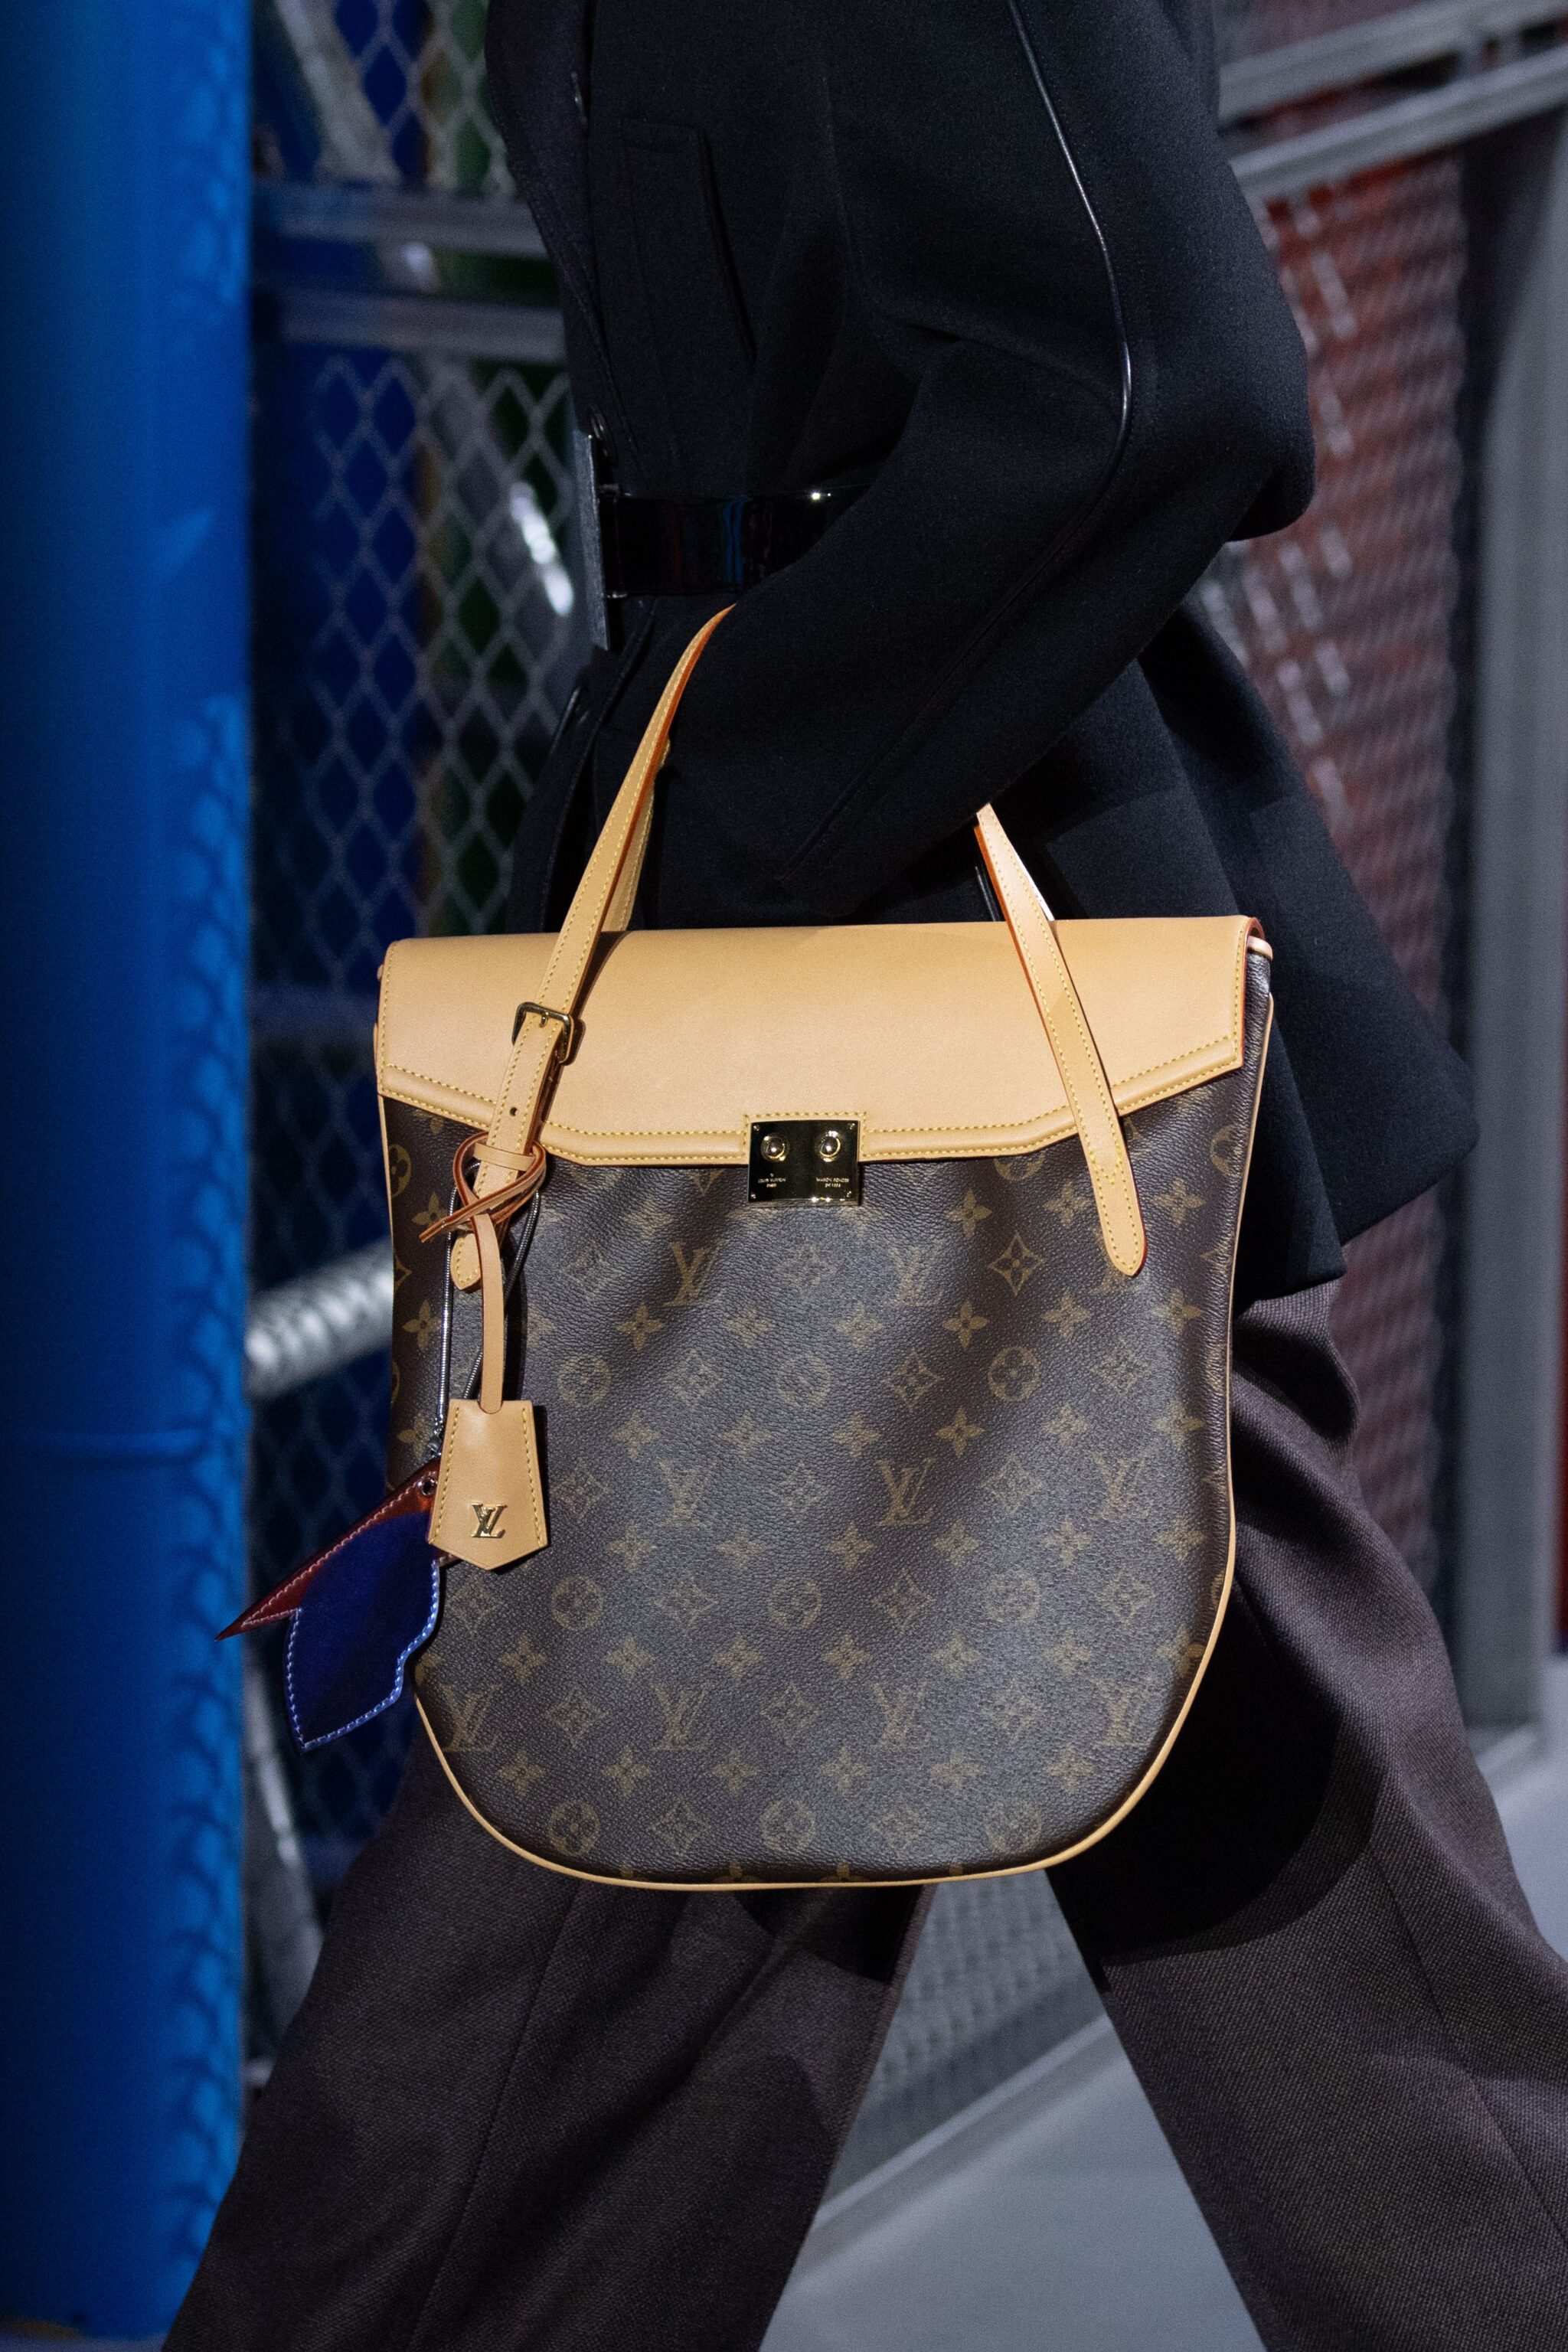 2019 New Collection For Louis Vuitton Handbags, LV Bags to Have.  #Louisvuittonhandbags